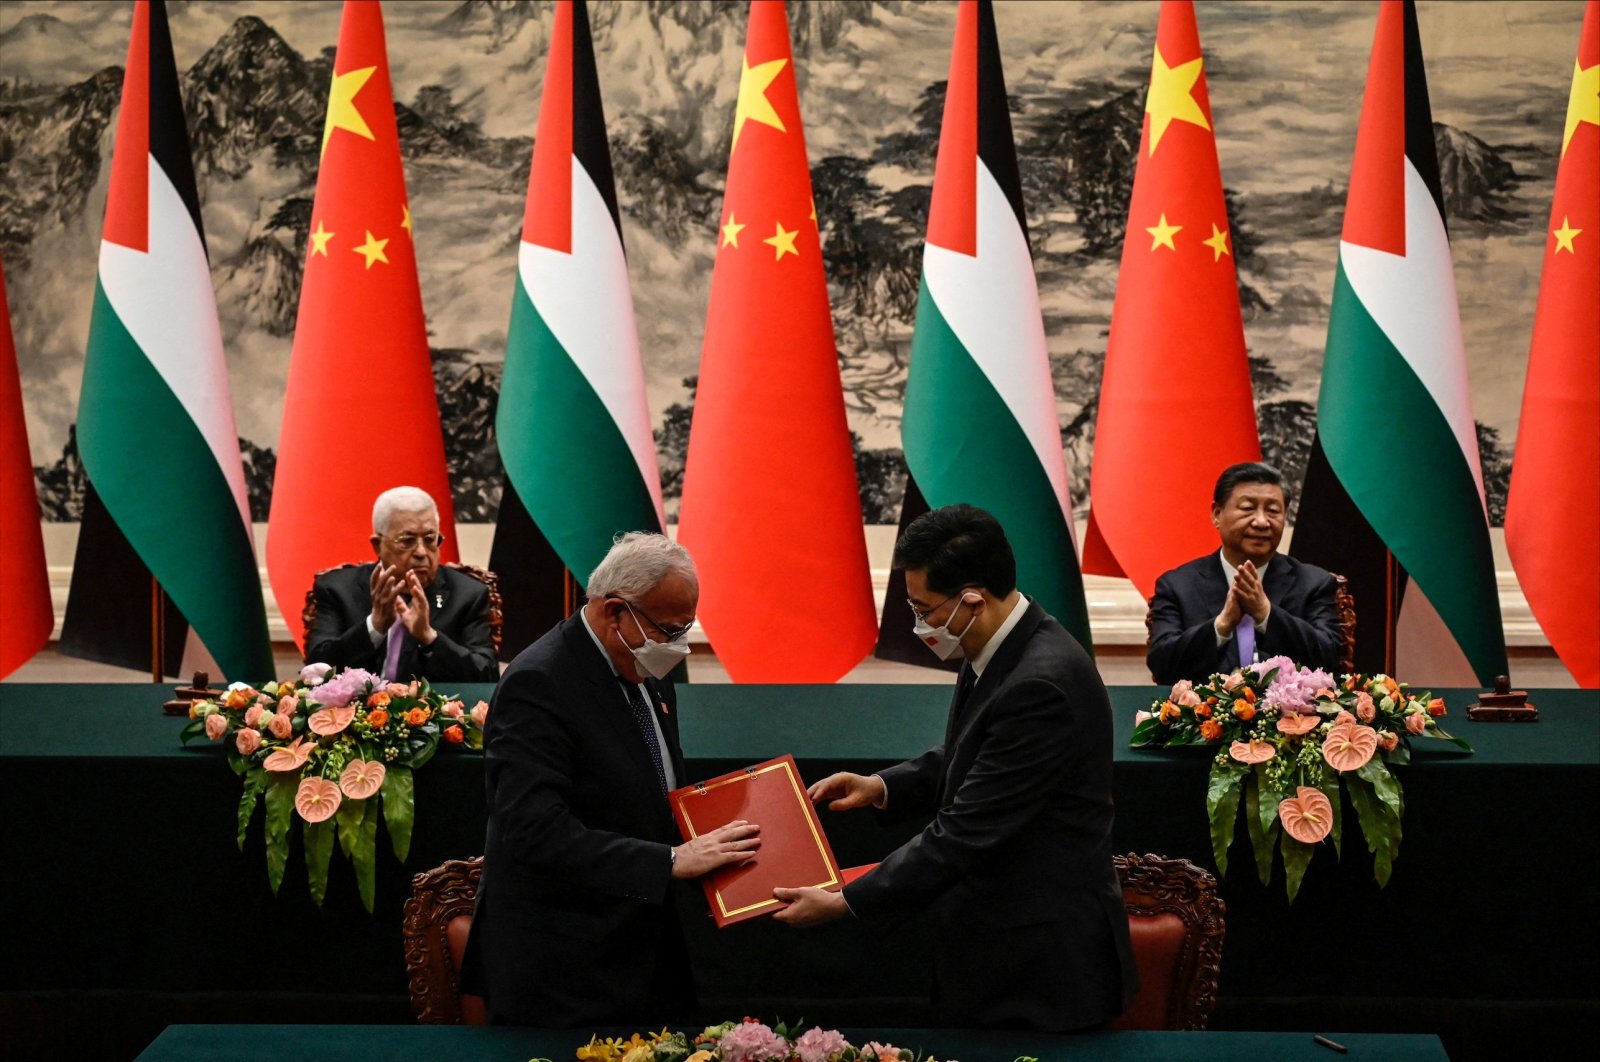 Palestinian Foreign Minister Riyad Al-Maliki (L-2) attends a signing ceremony with Chinese Foreign Minister Qin Gang (R) as Palestinian President Mahmoud Abbas (L) and China&#039;s President Xi Jinping applaud at the Great Hall of the People, Beijing, China, June 14, 2023. (Reuters Photo)